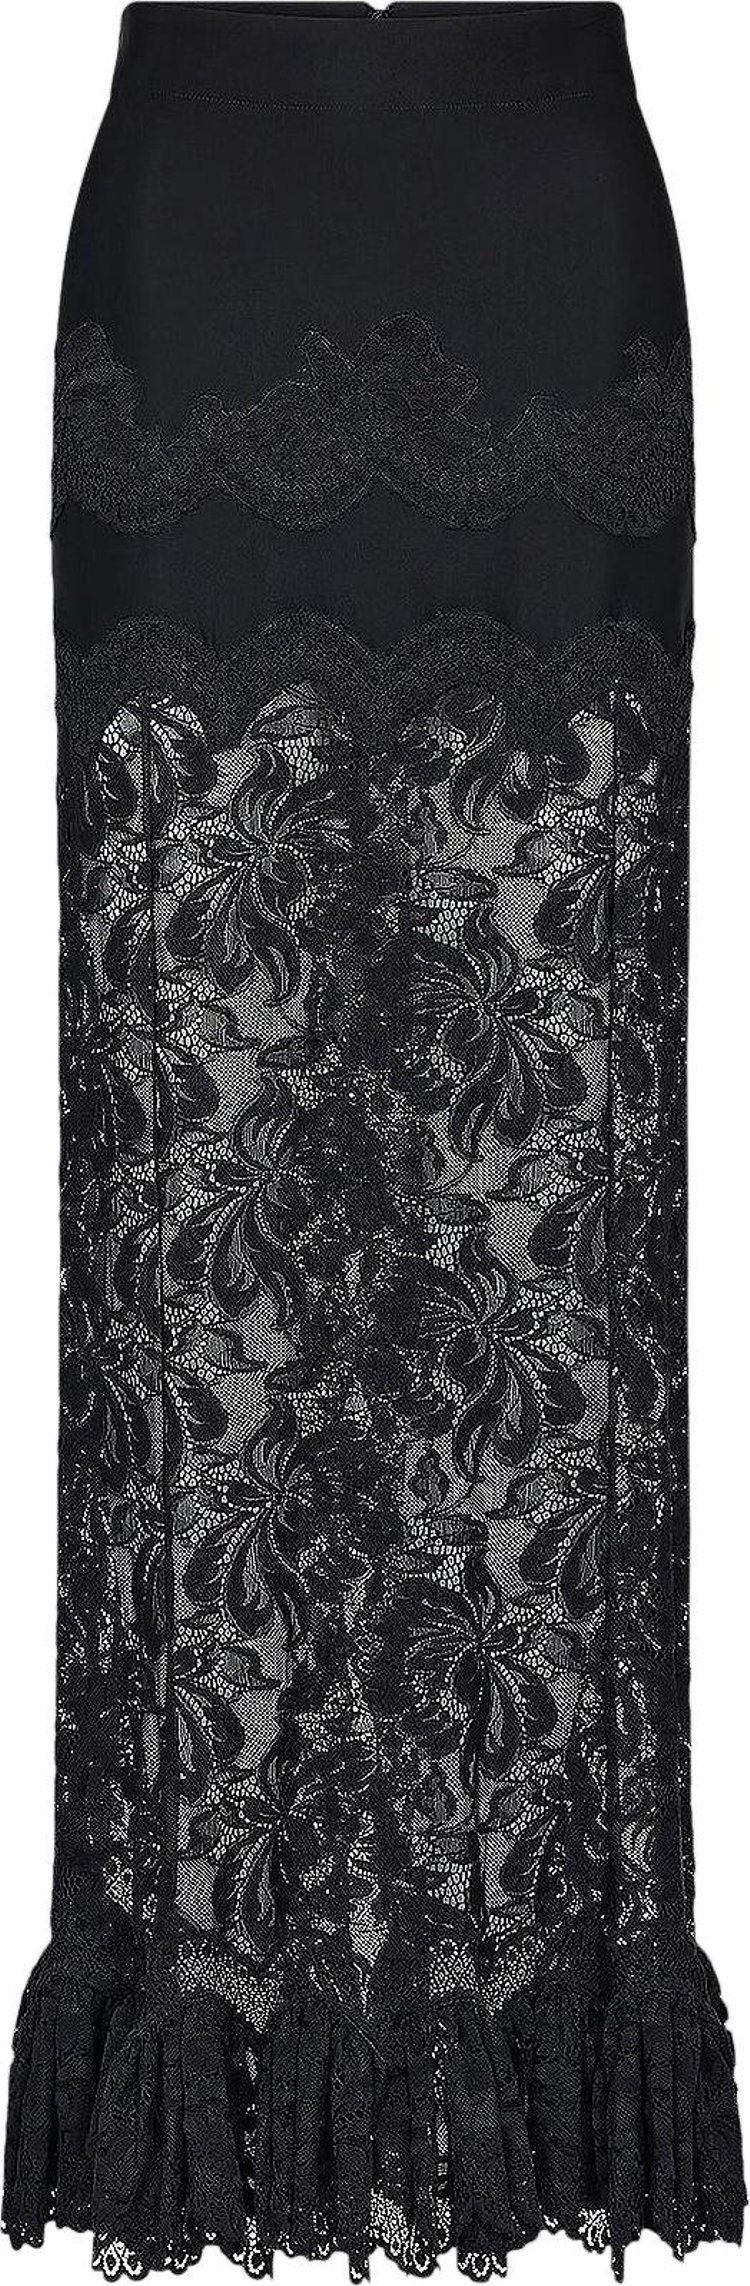 Paco Rabanne Floral Embroidered Stretch Woven Maxi Skirt 'Black'